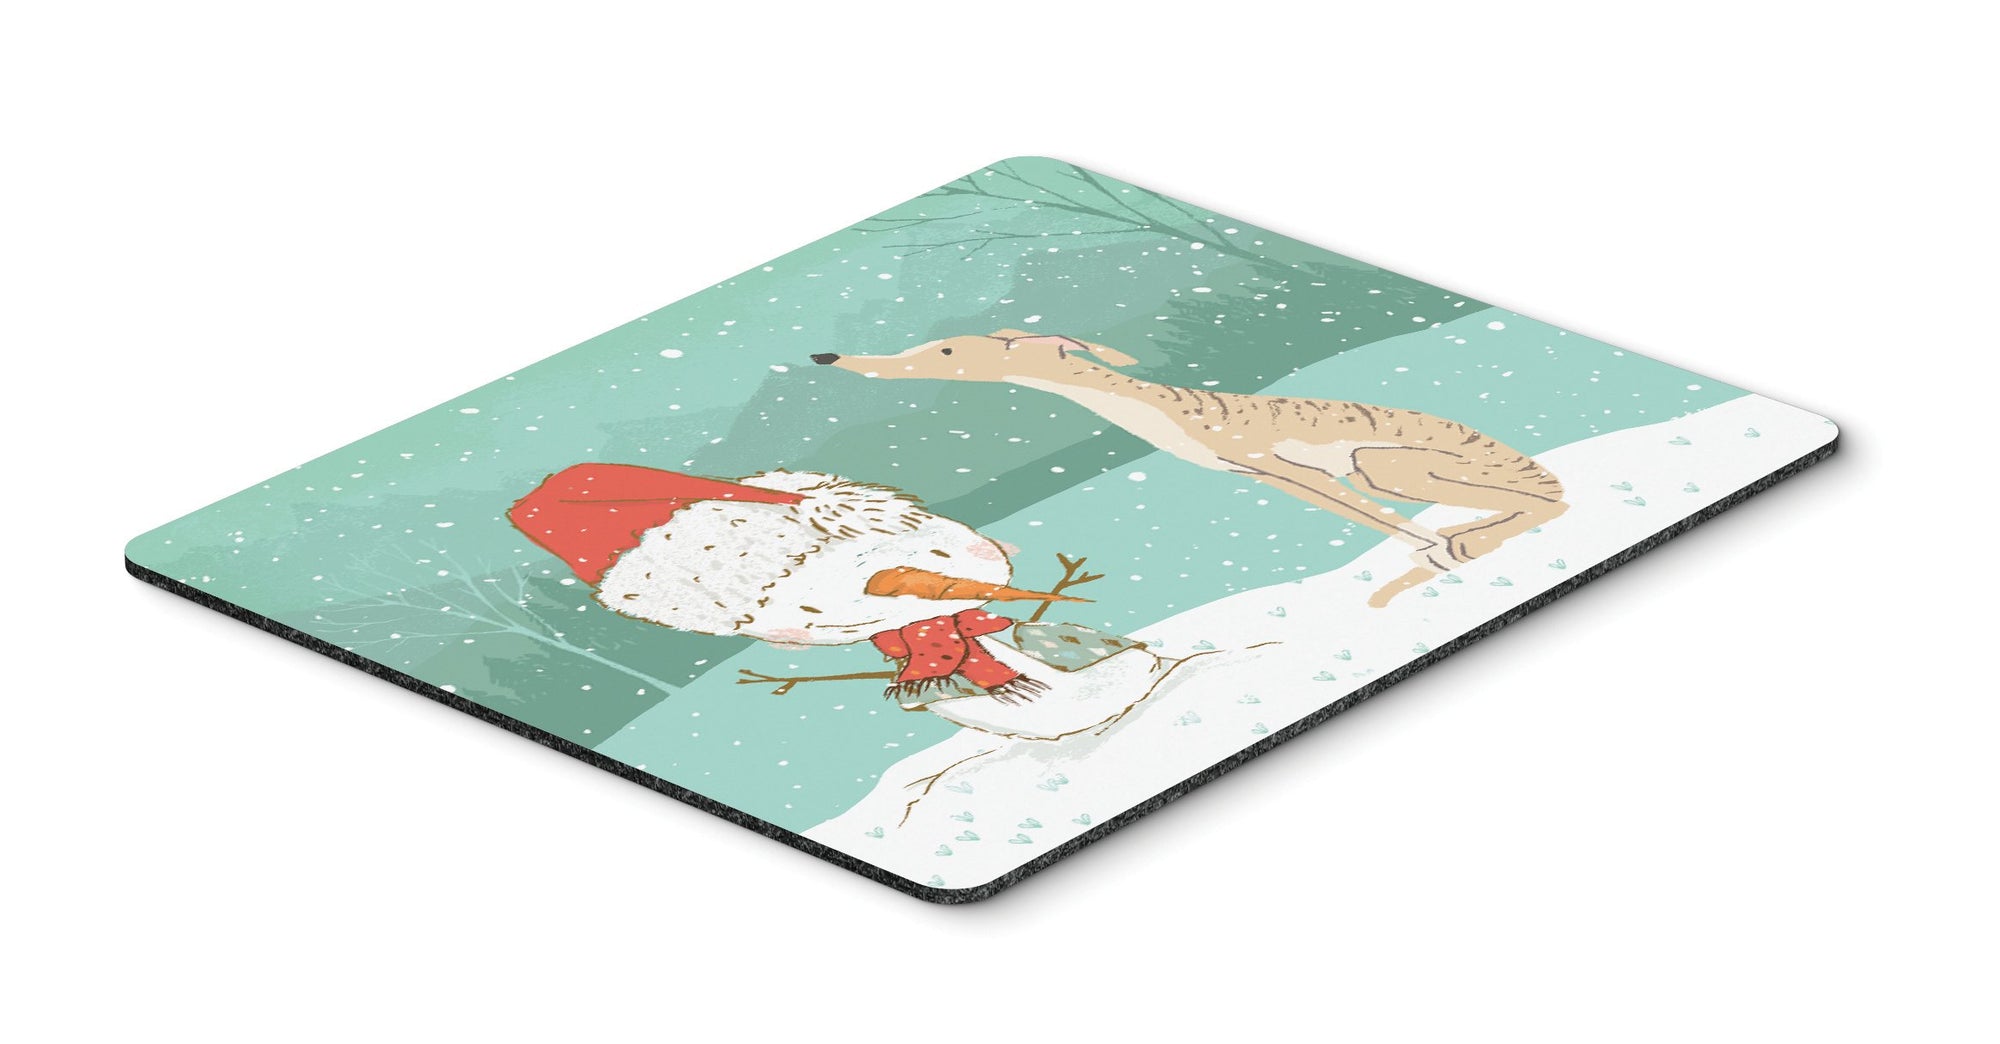 Brindle Greyhound Snowman Christmas Mouse Pad, Hot Pad or Trivet CK2043MP by Caroline's Treasures